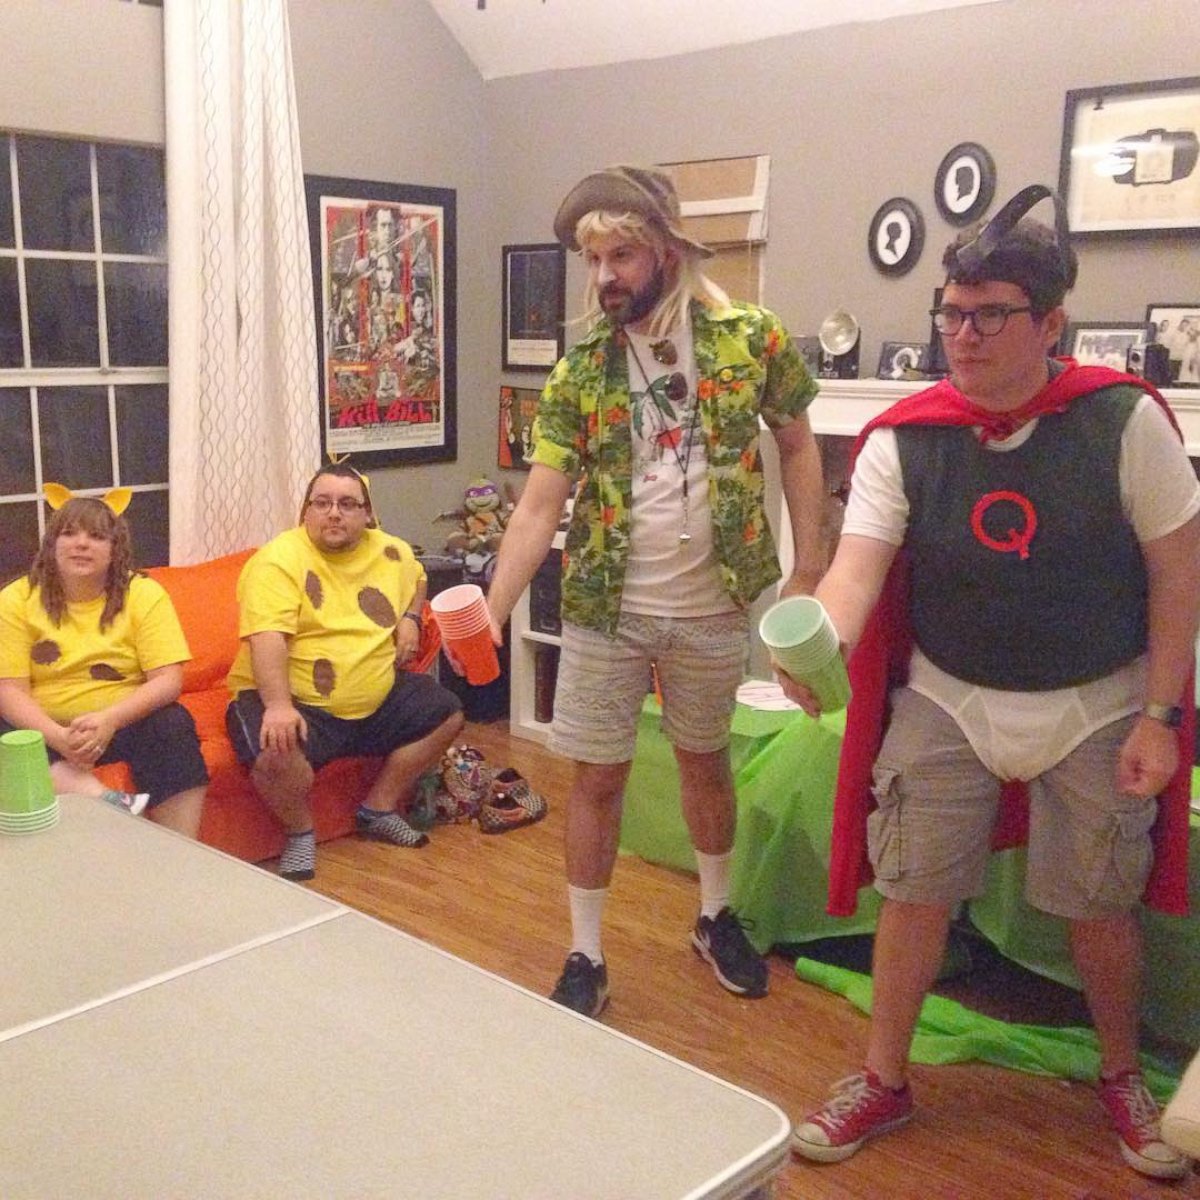 PHOTO: Man’s Nickelodeon-Themed Throwback 31st Birthday Party Will Test Your ‘Guts’